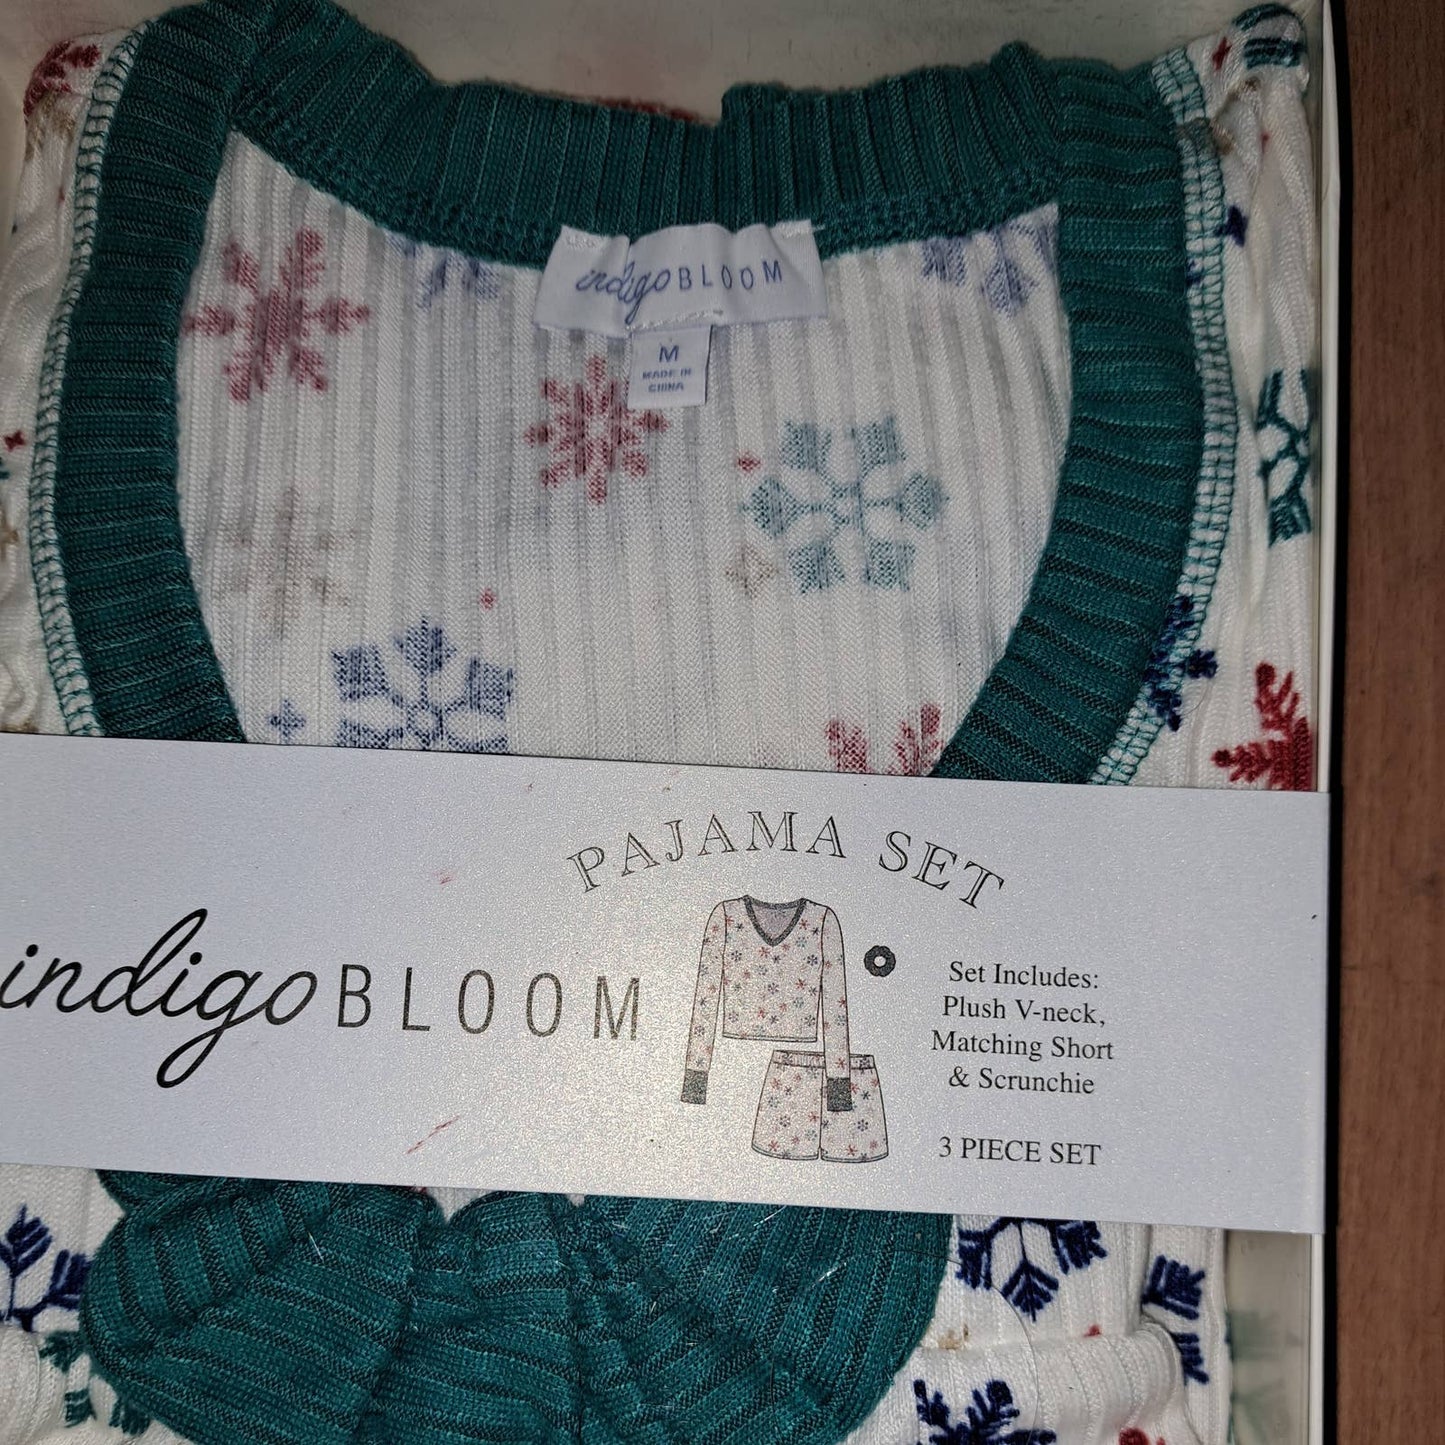 NIB -SZ M Ready for Gifting 3Pc Shorts PJs Set with matching hair tie too